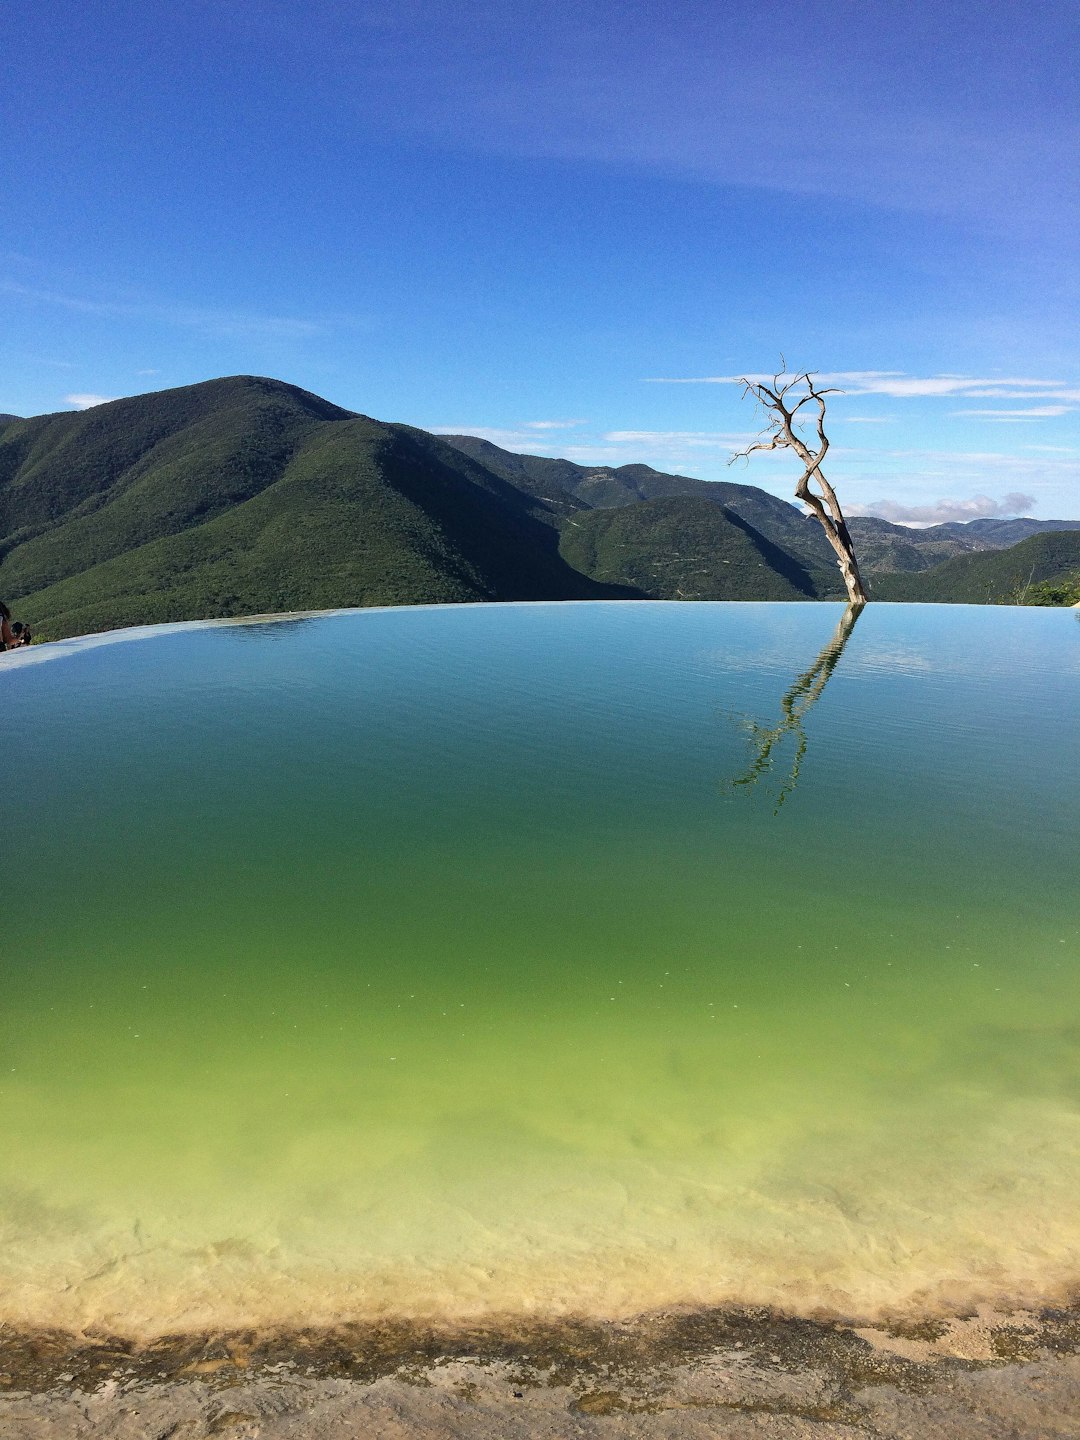 Travel Tips and Stories of Hierve el Agua in Mexico